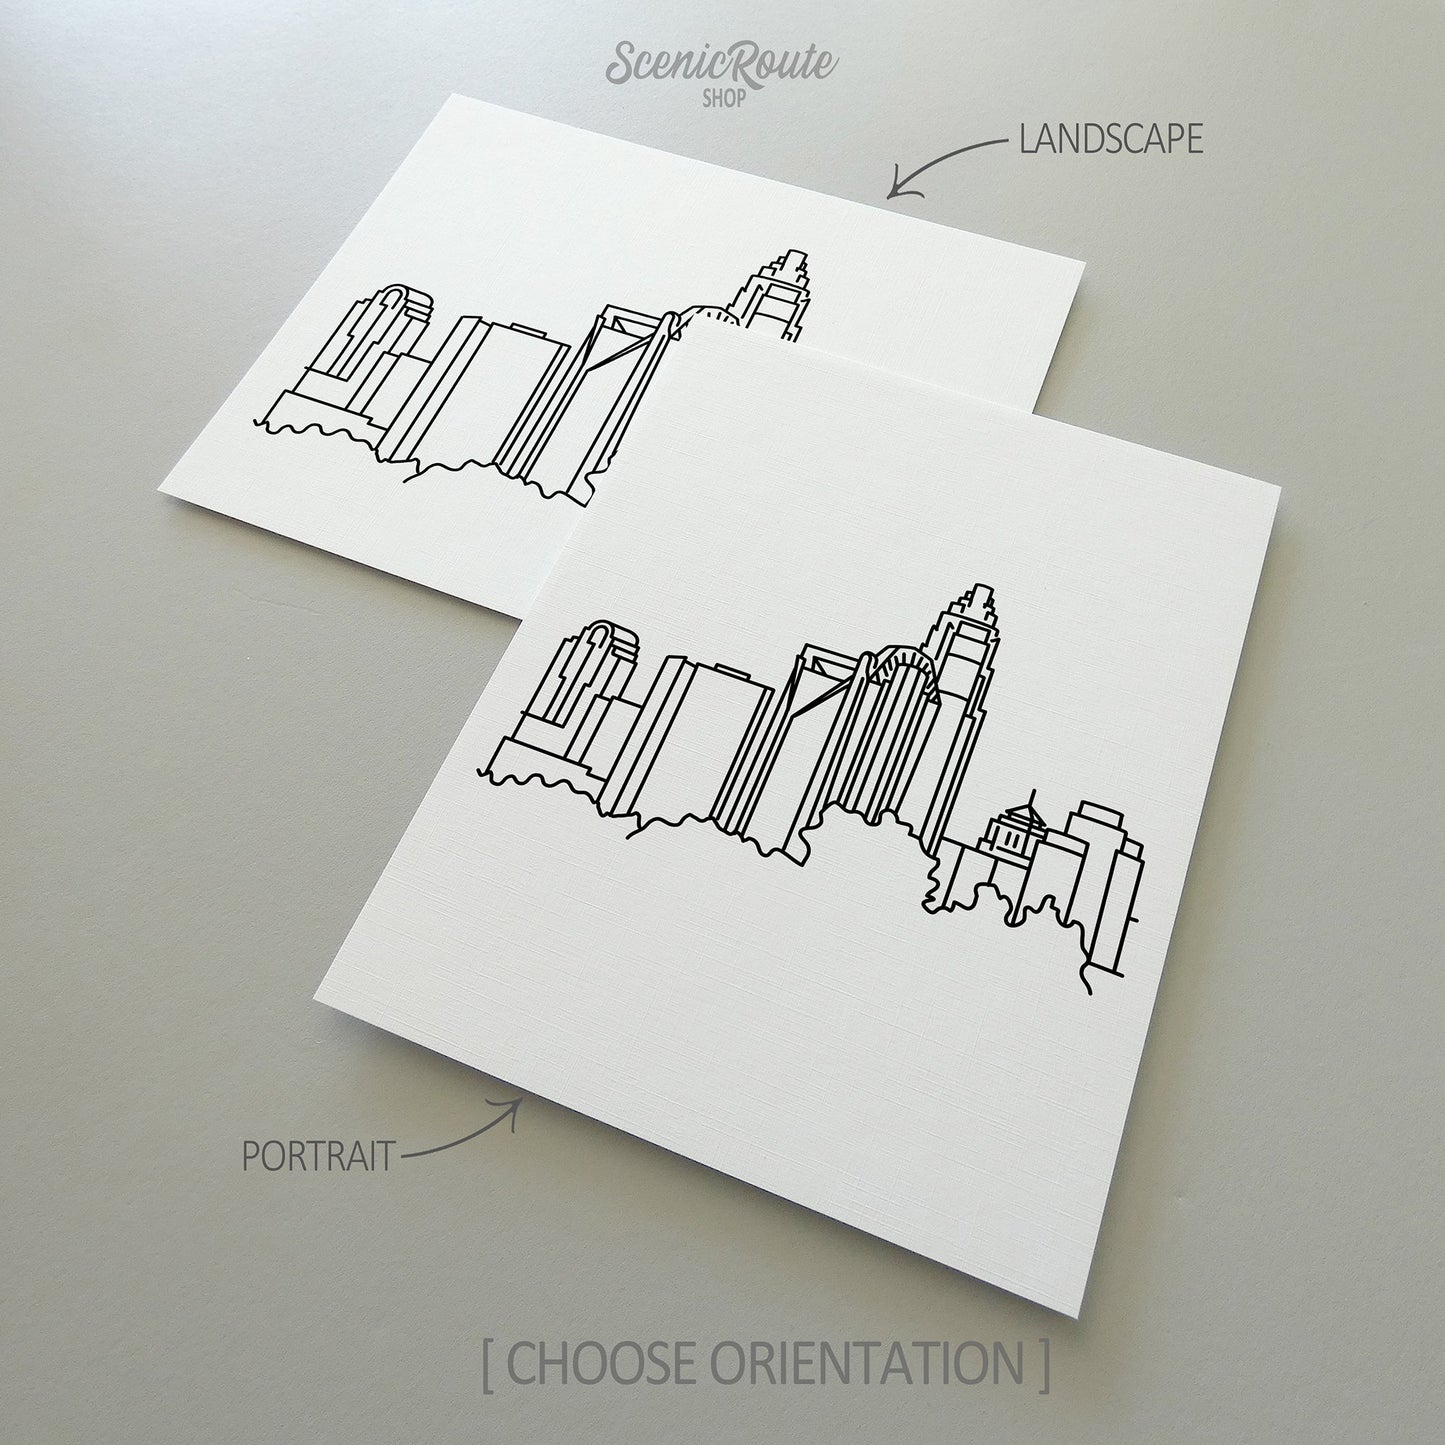 Two line art drawings of the Charlotte Skyline on white linen paper with a gray background.  The pieces are shown in portrait and landscape orientation for the available art print options.